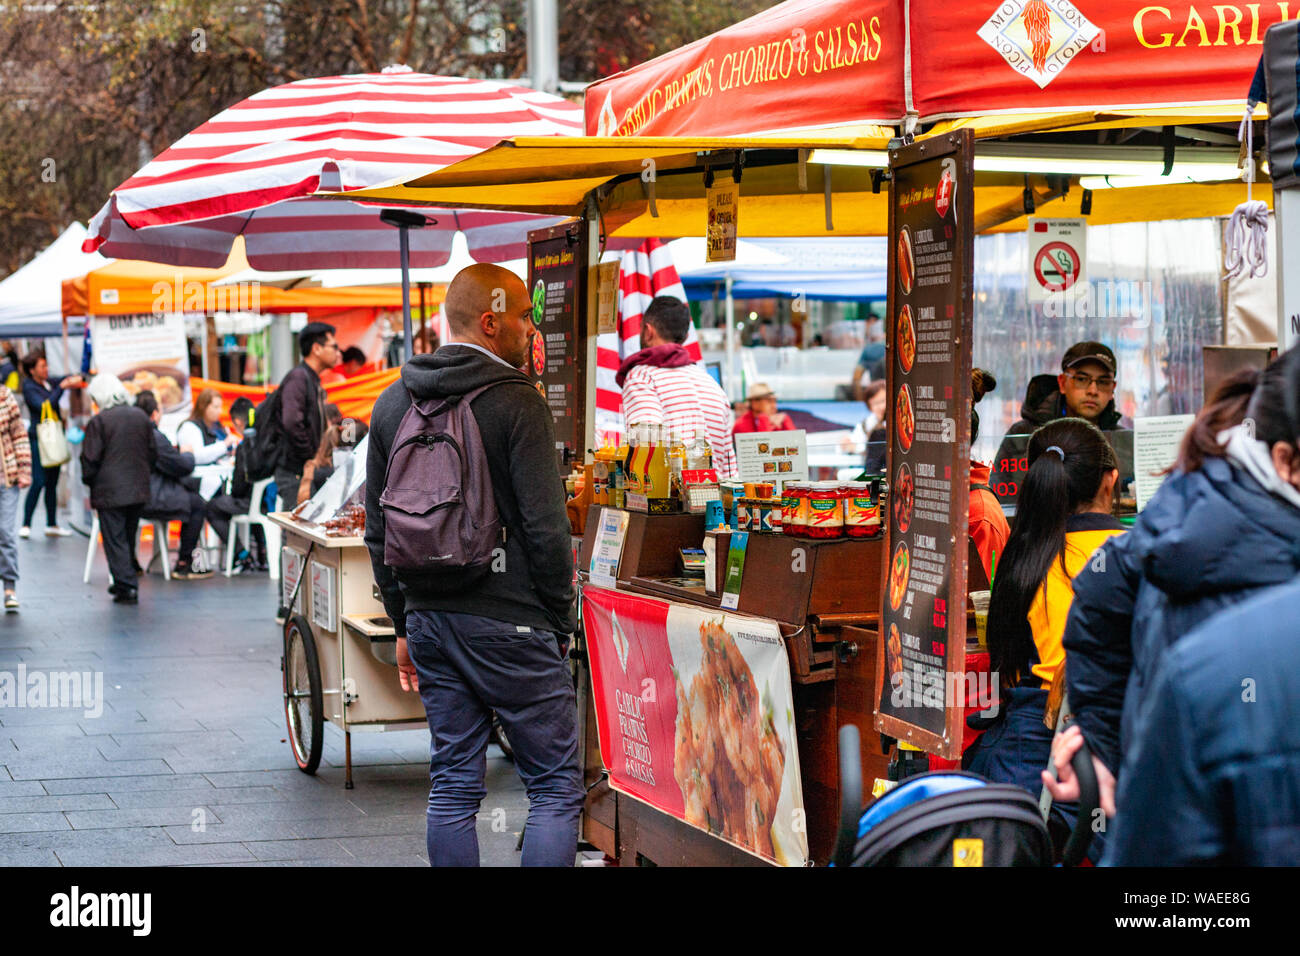 Sydney, NSW / Australia - July 26 2019: Busy colorul street market with people in Chatswood Australia Stock Photo